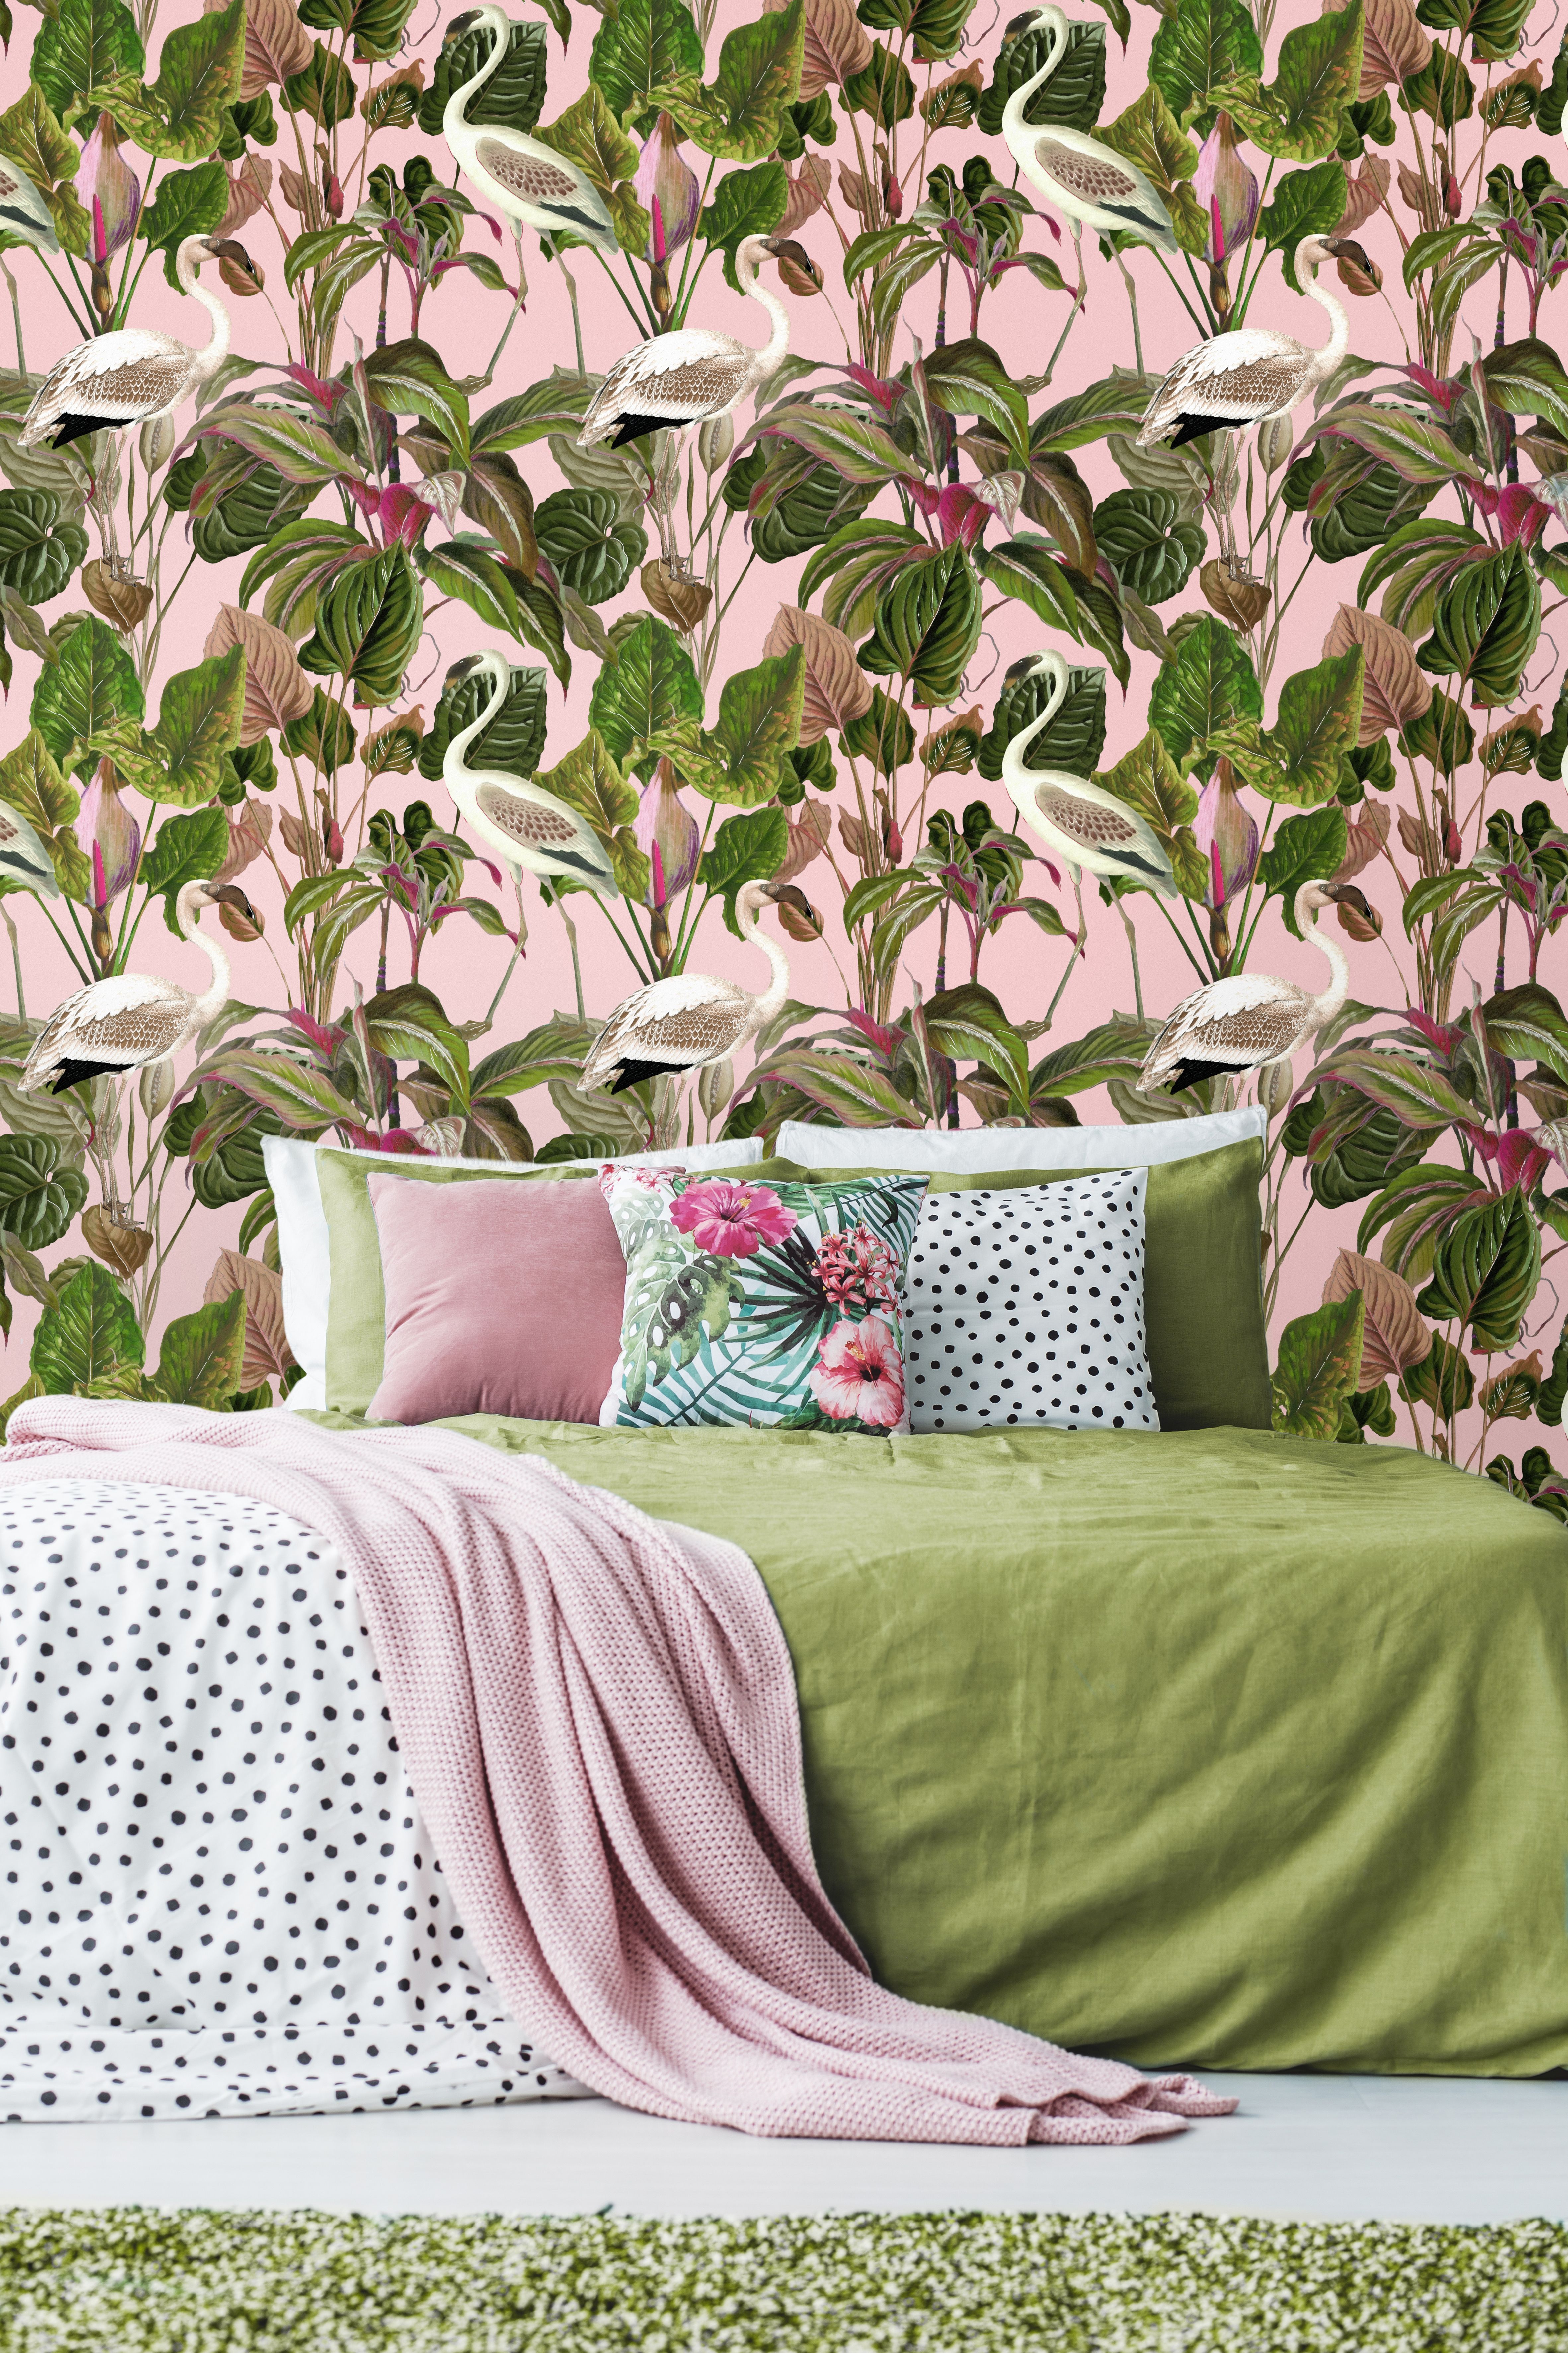 Beverly Hills Botanicals In Pink Wallpaper Funky